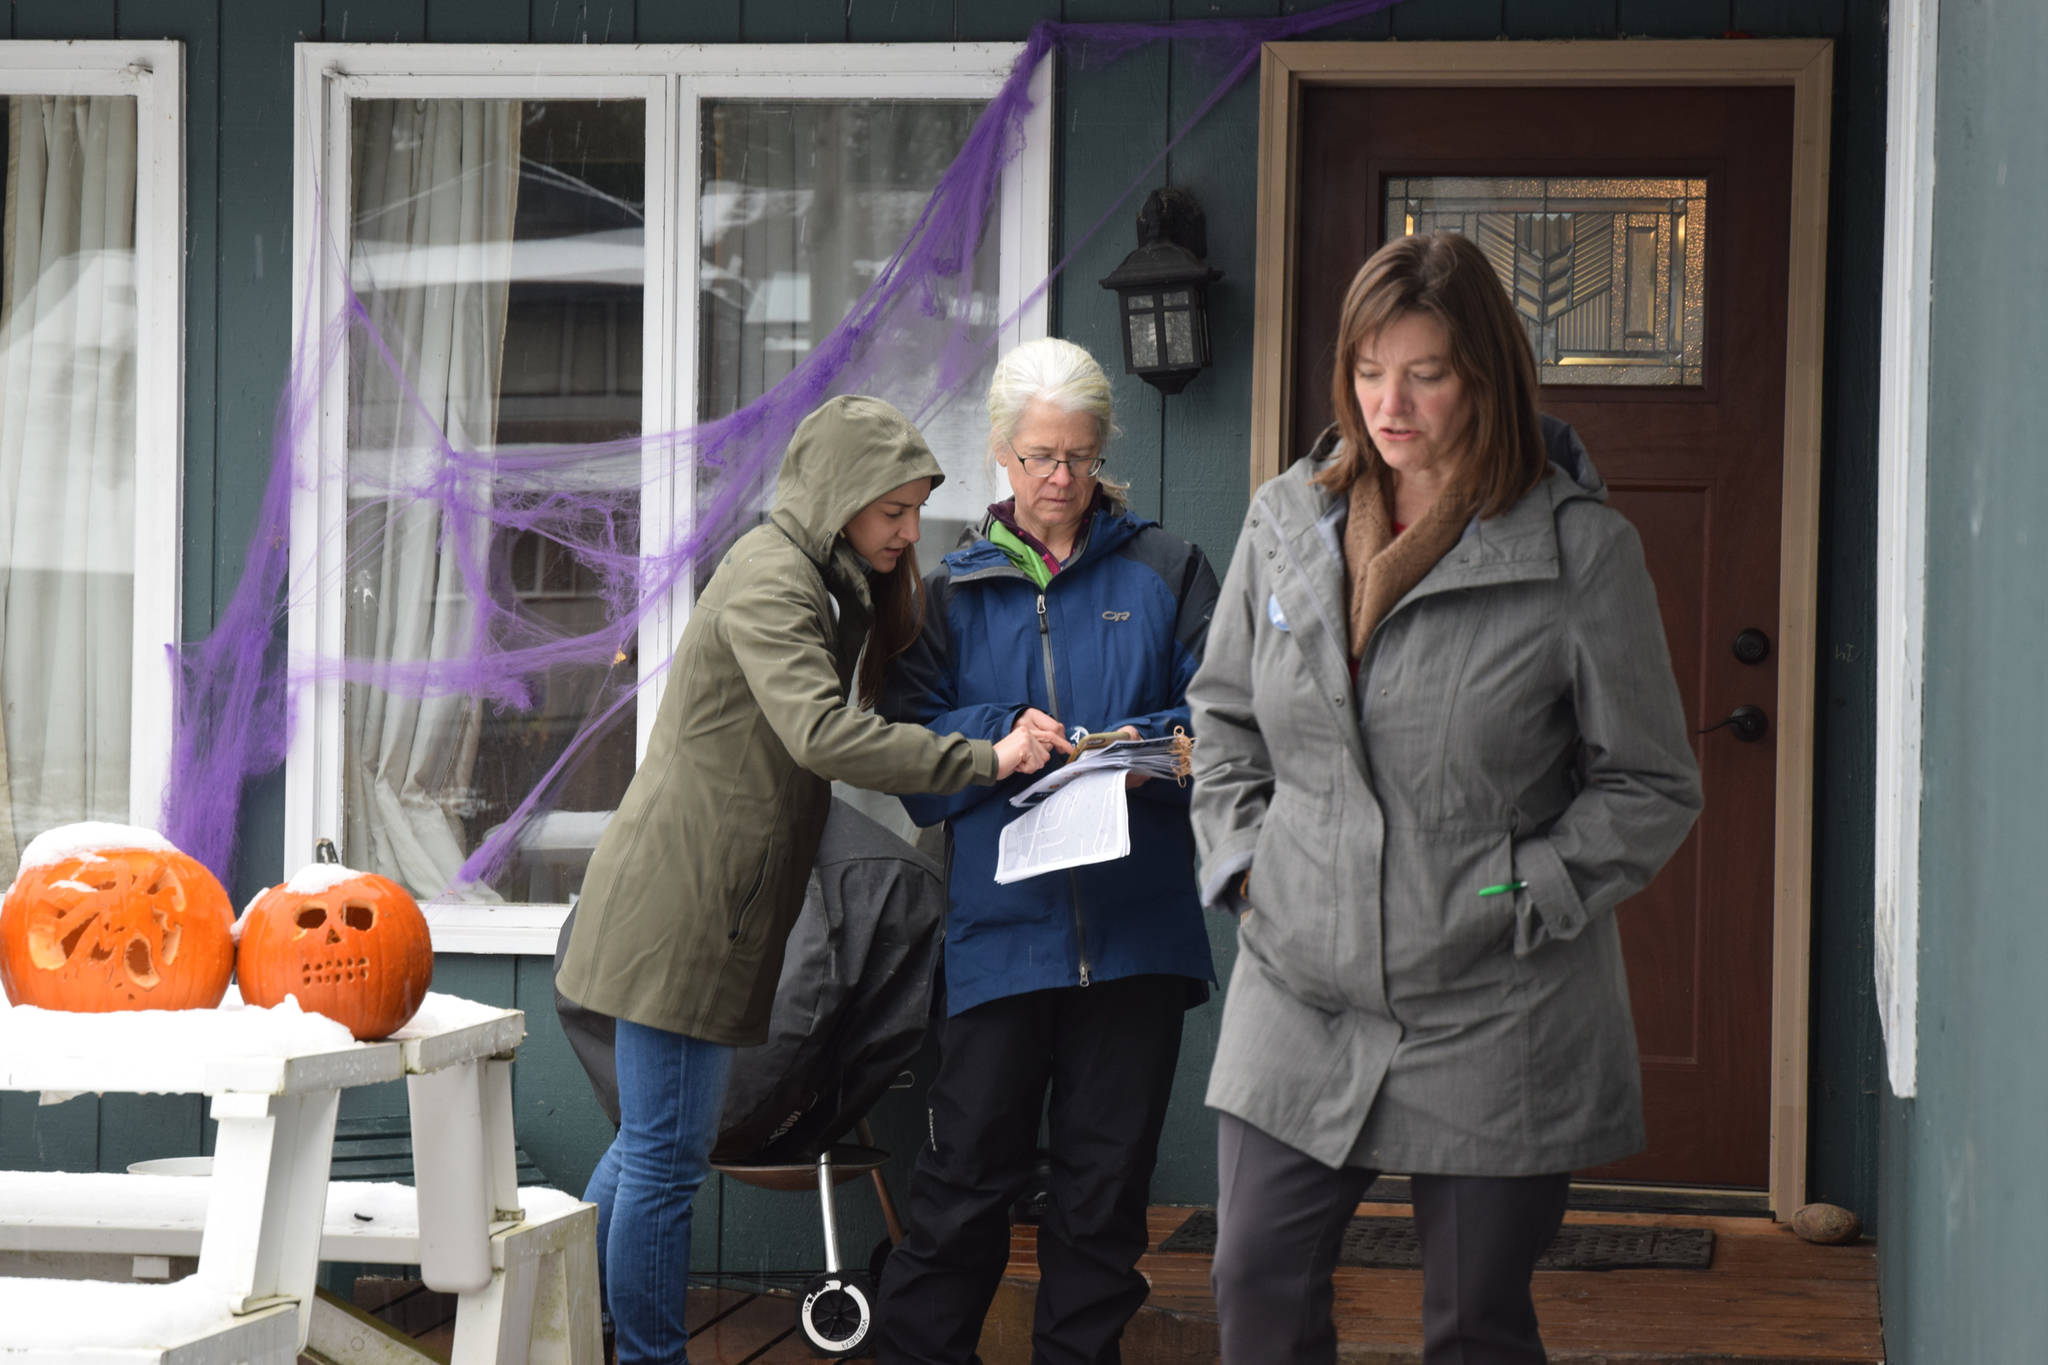 Alyse Galvin, Alaska’s independent candidate for U.S. House of Representatives, leaves a home after talking with its residents Sunday, Nov. 4, 2018 in the Mendenhall Valley. Galvin was in Juneau for a final campaign stop ahead of the election. (James Brooks | Juneau Empire)